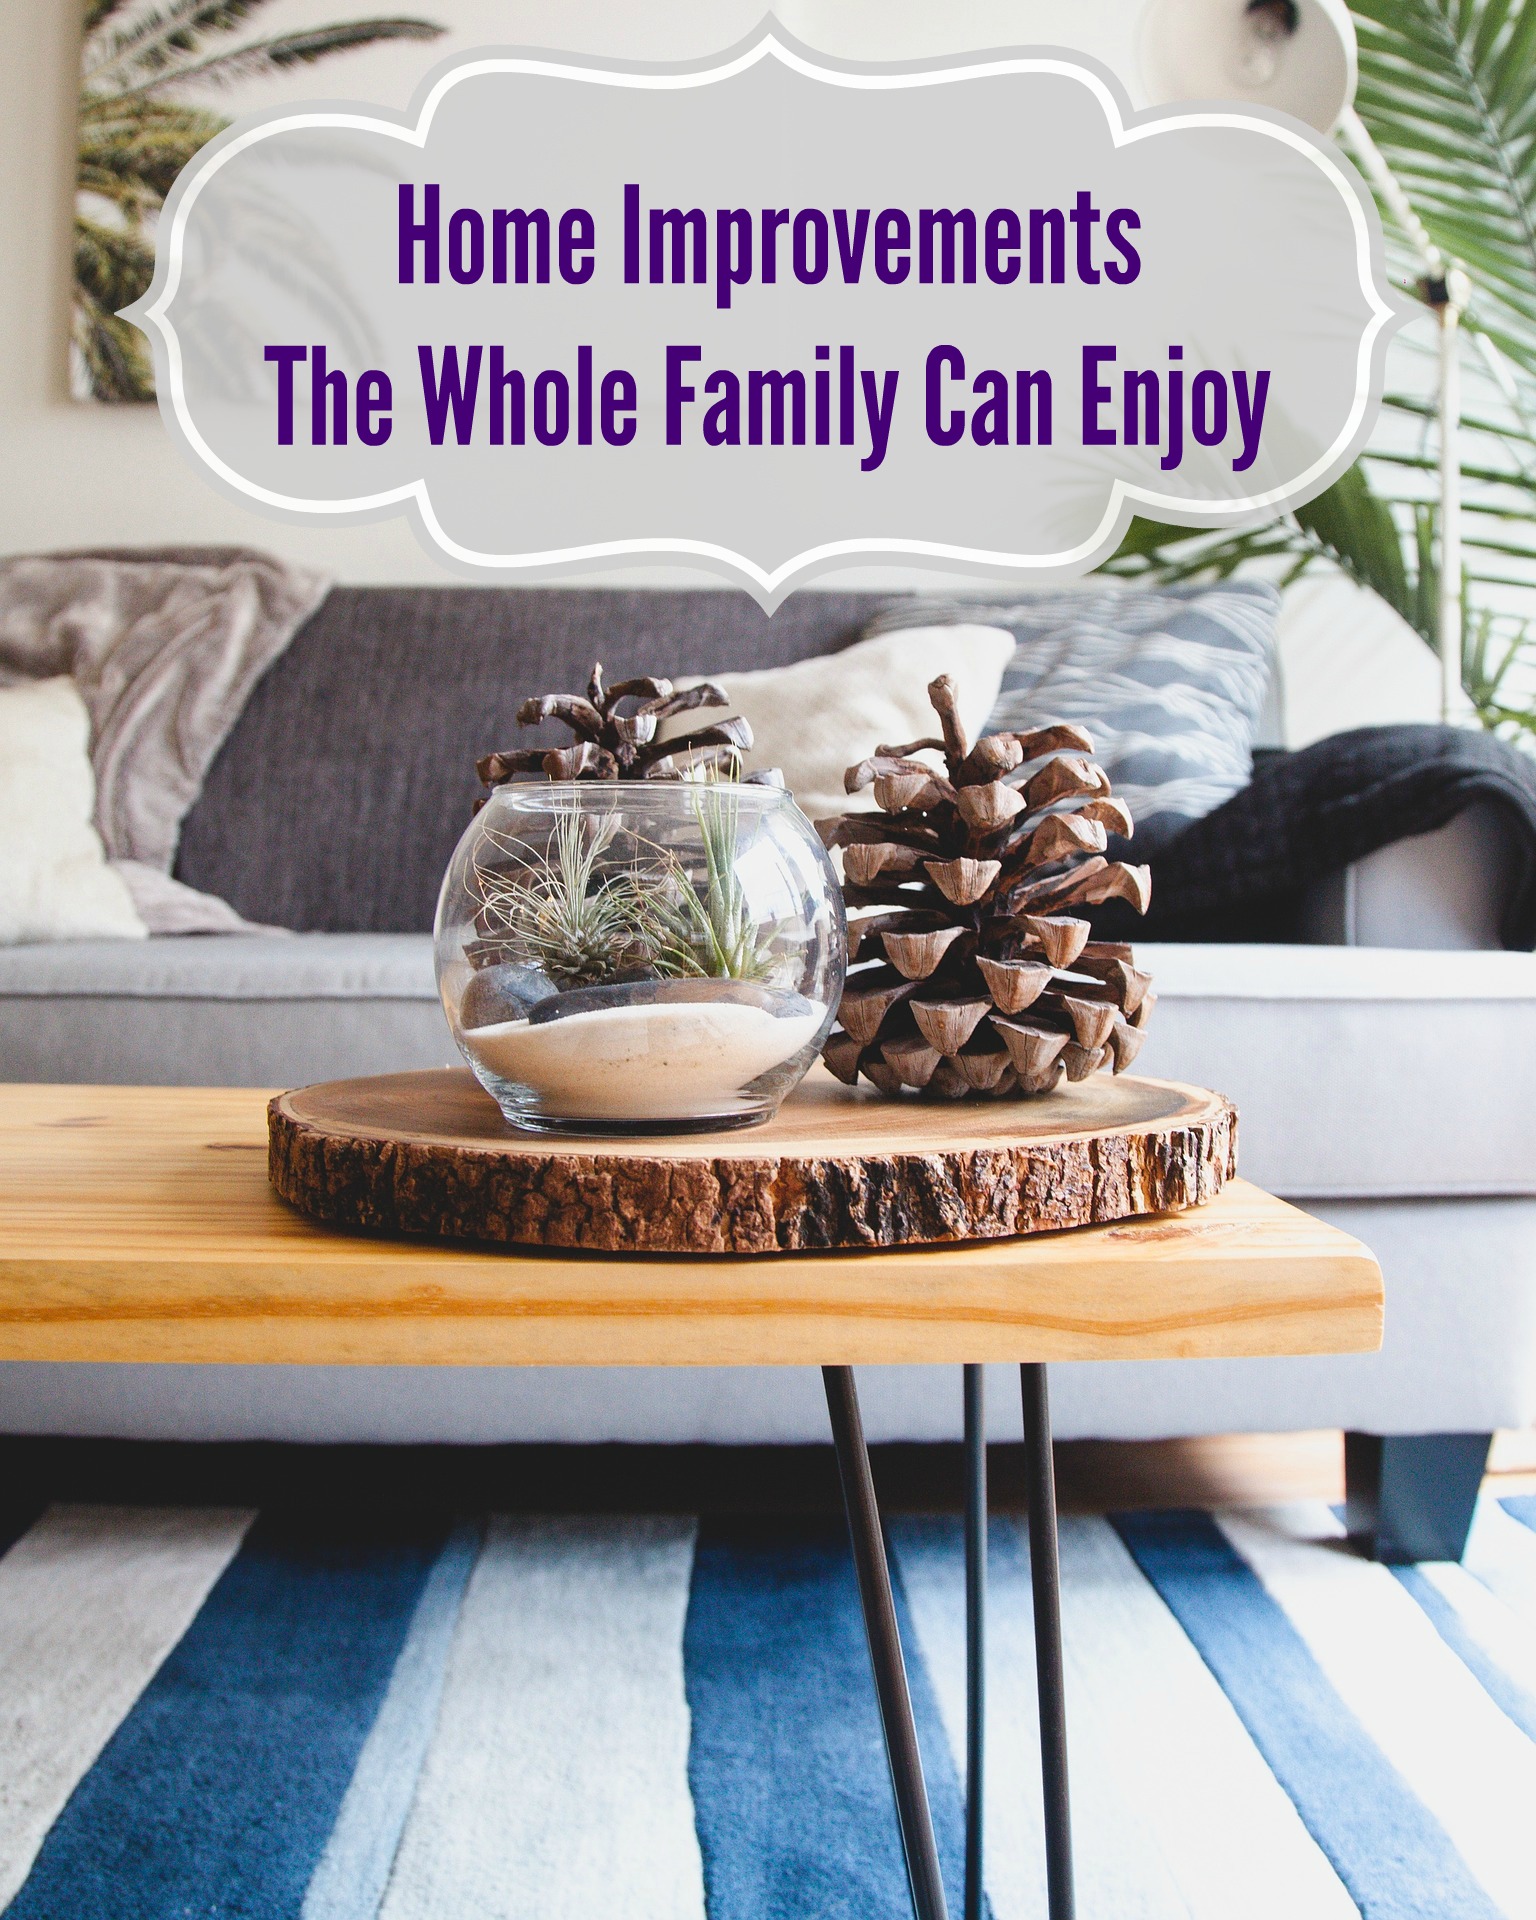 Home Improvements The Whole Family Can Enjoy